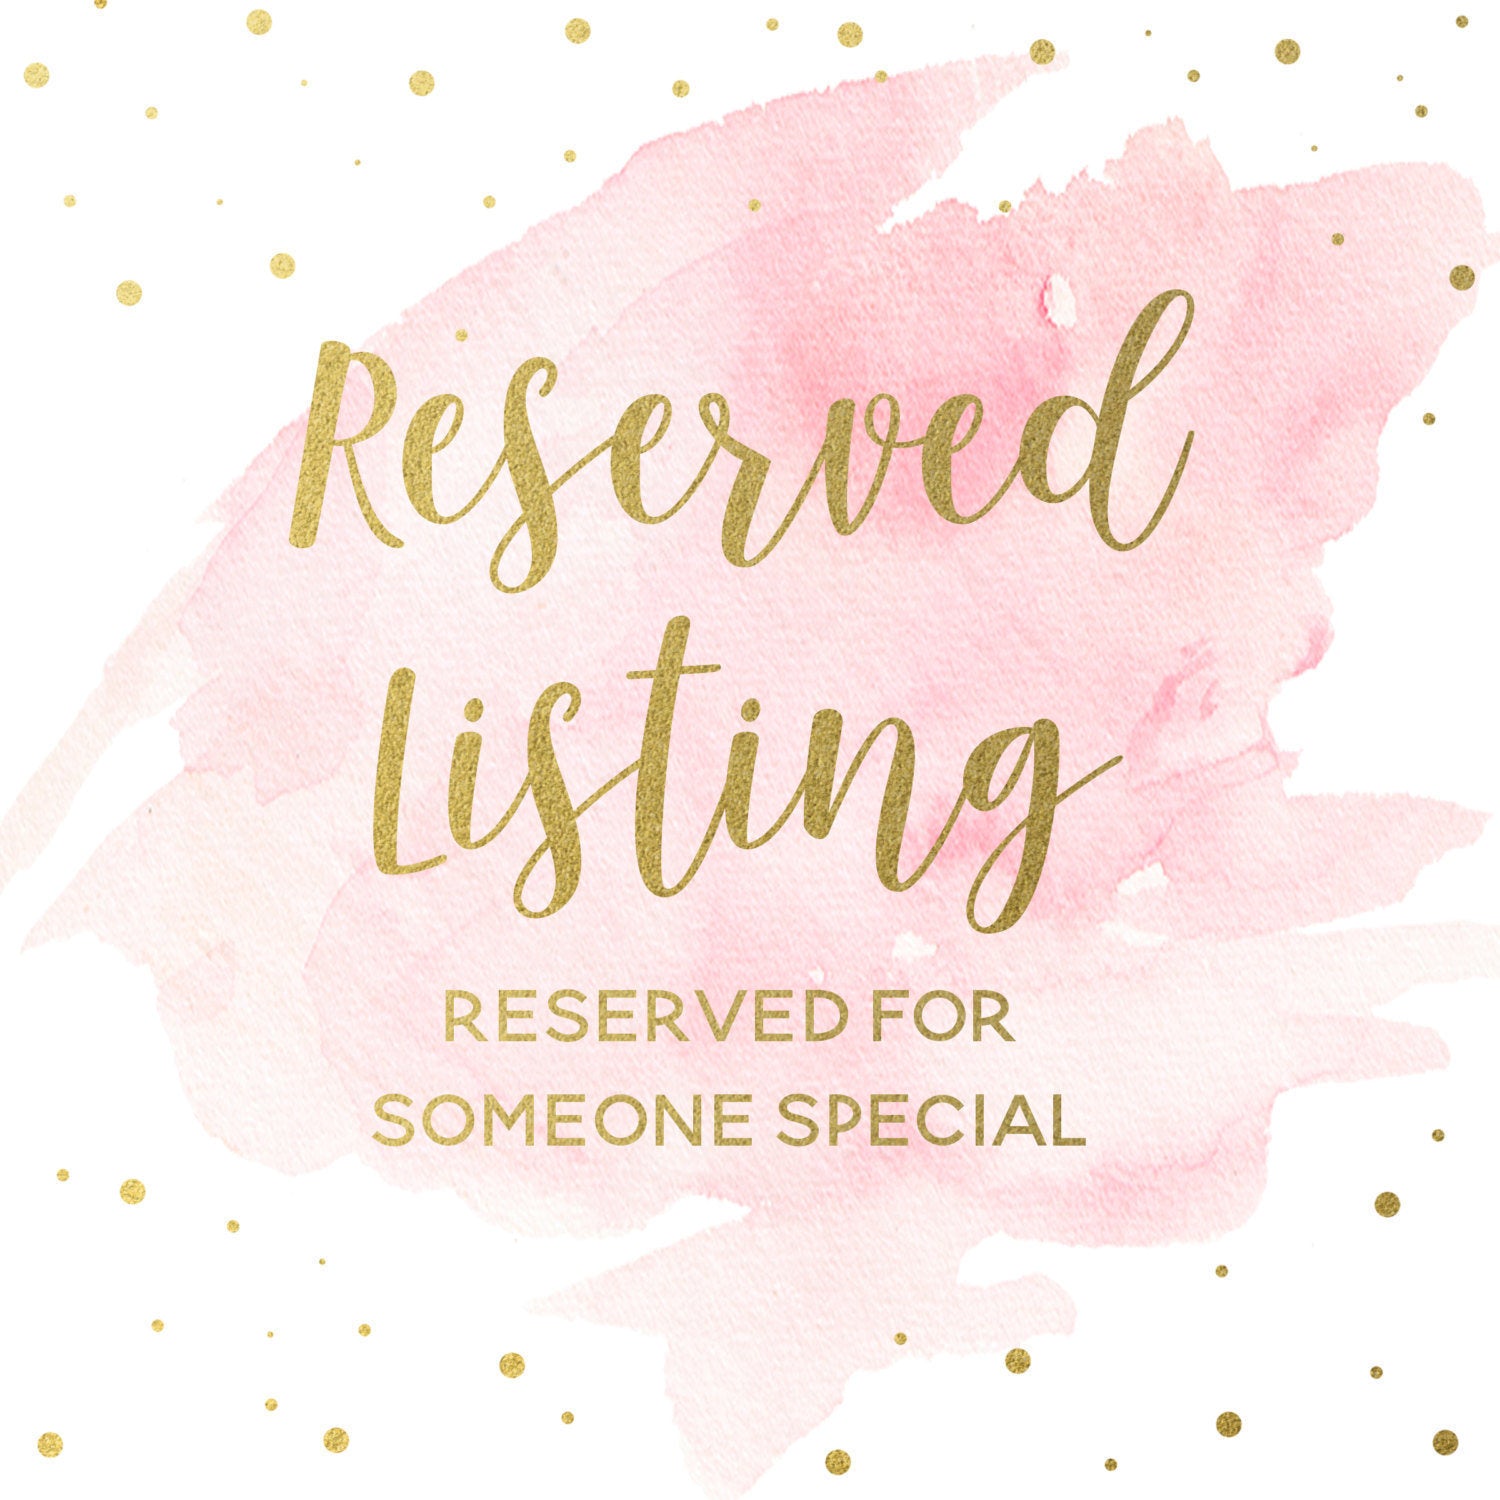 Reserved Listing - Kayla T.